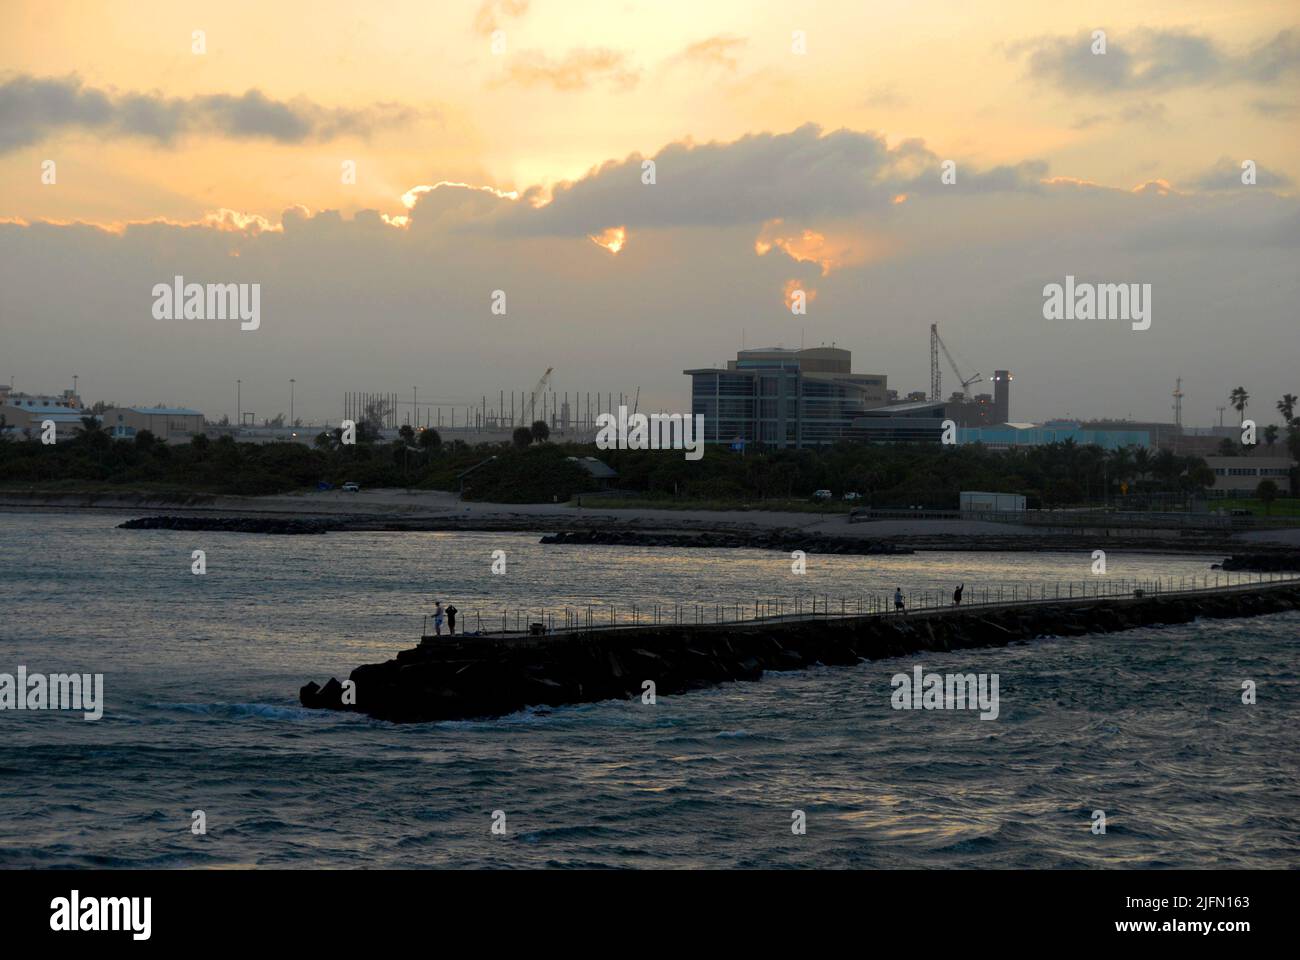 Industrial landscape seen leaving Fort Lauderdale, Florida, USA by sea with people on a jetty Stock Photo